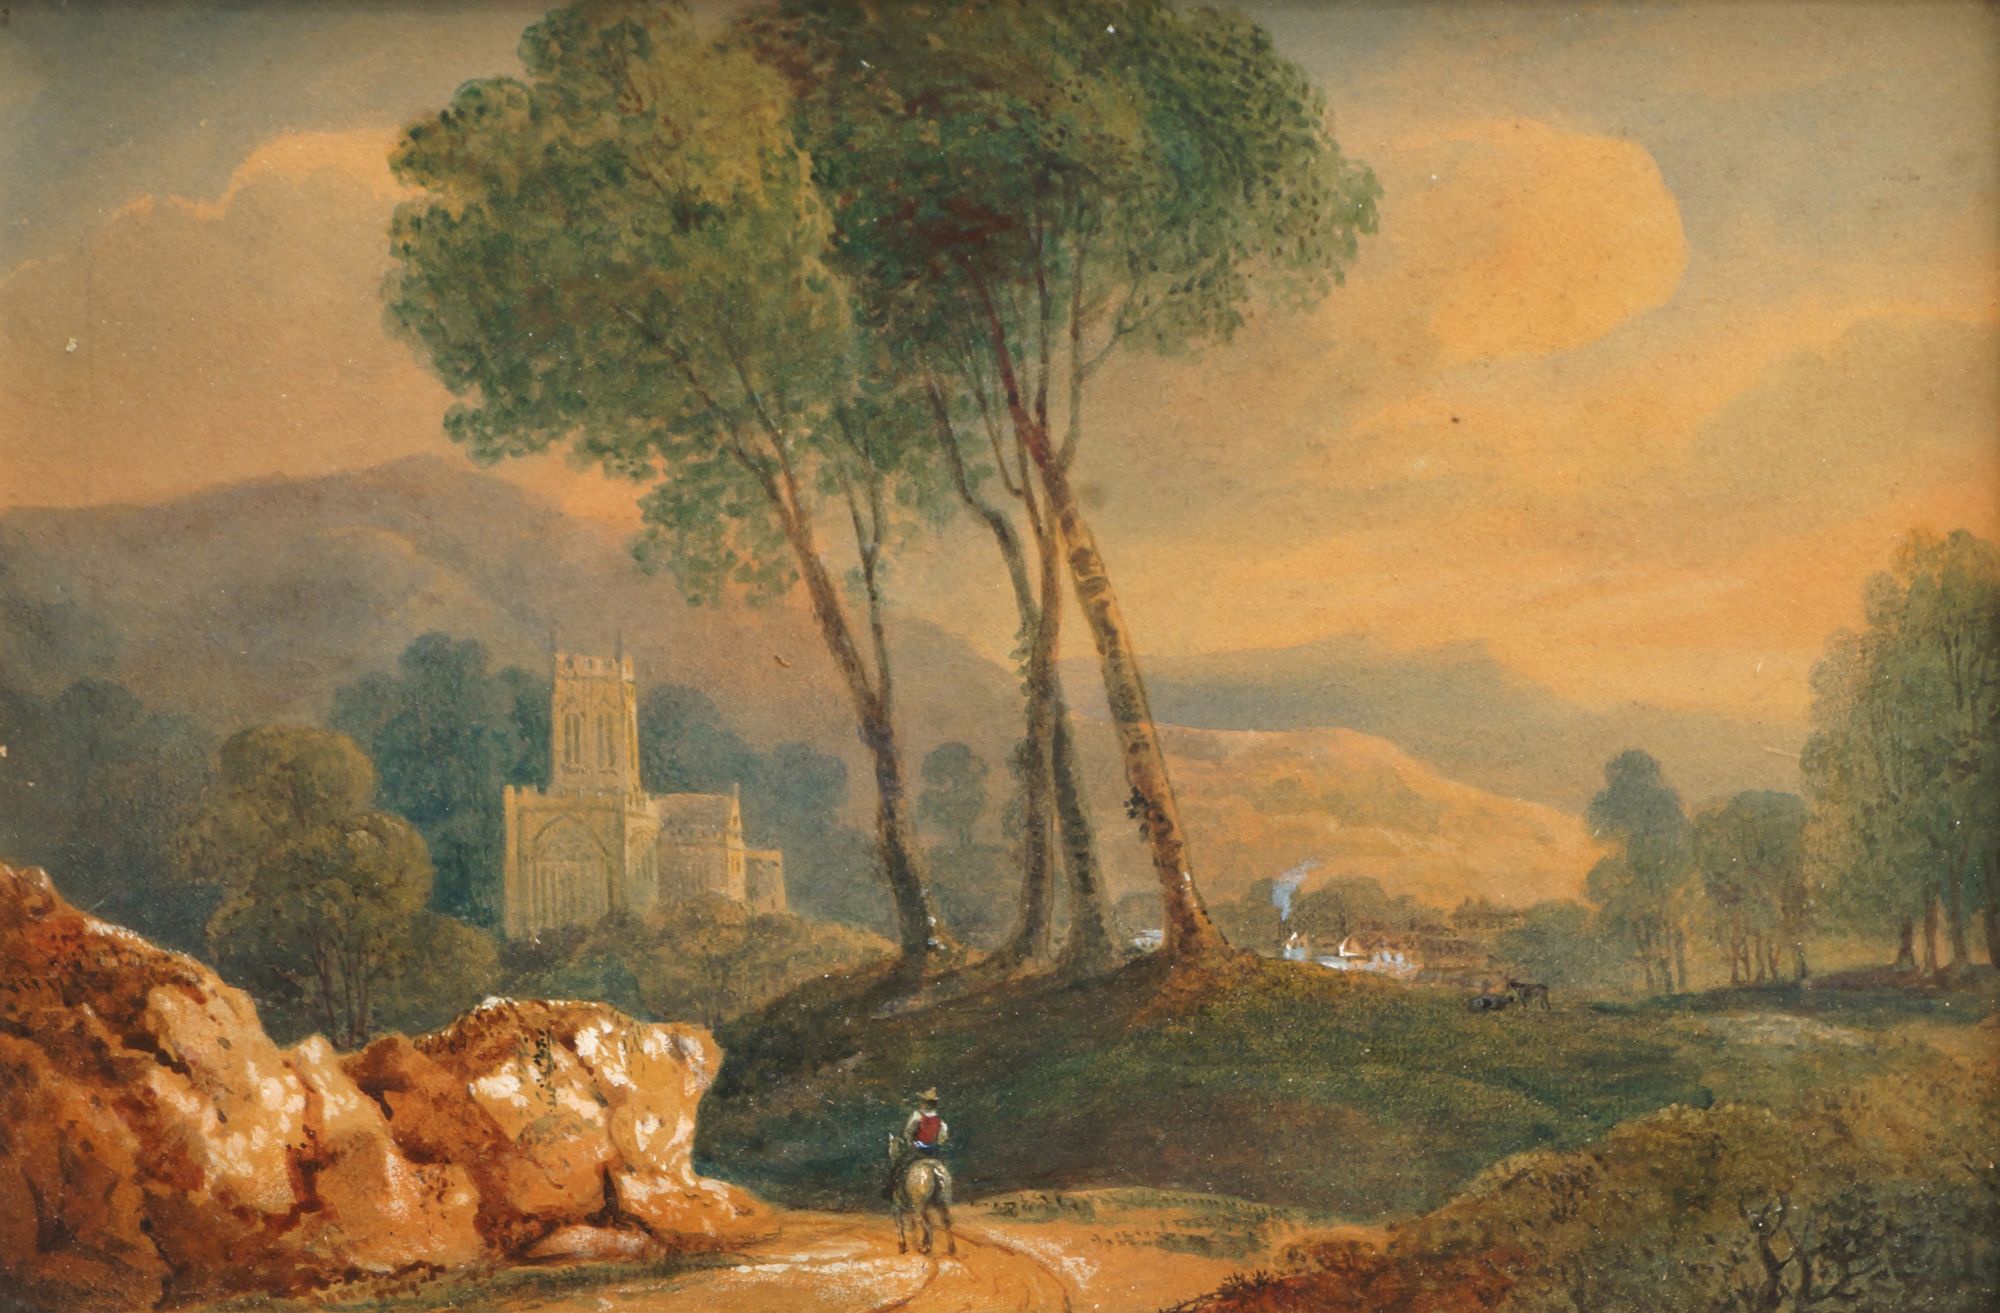 Richard Sasse, British 1774-1849- Chateaui de Glocester, (sic);watercolour, 21x30cm in a mid-19th